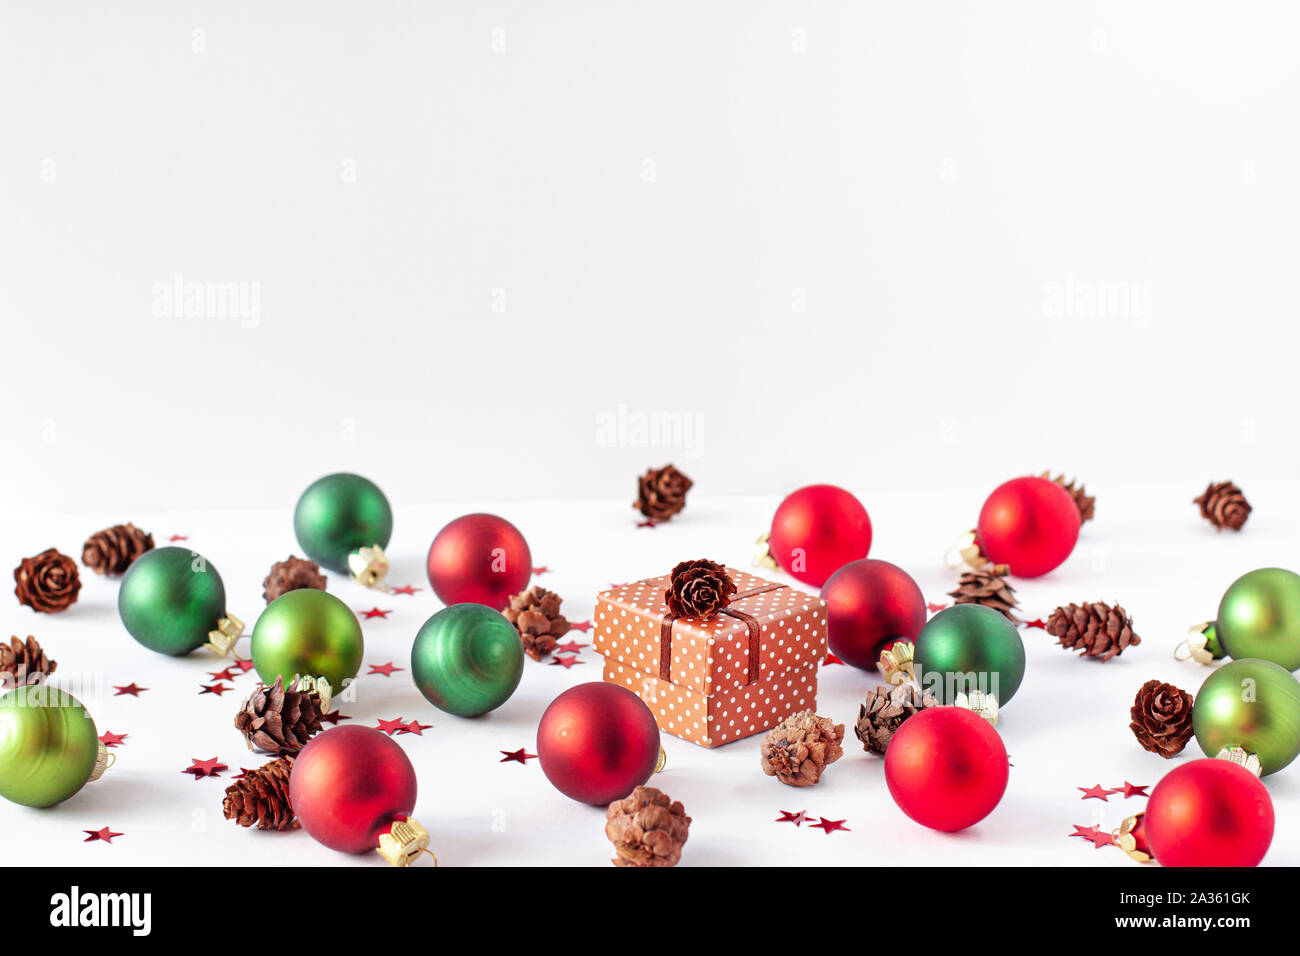 Decorative snow and christmas balls of red and green colors, pine cone, small red stars around and brown present box. Xmas concept with copy space Stock Photo